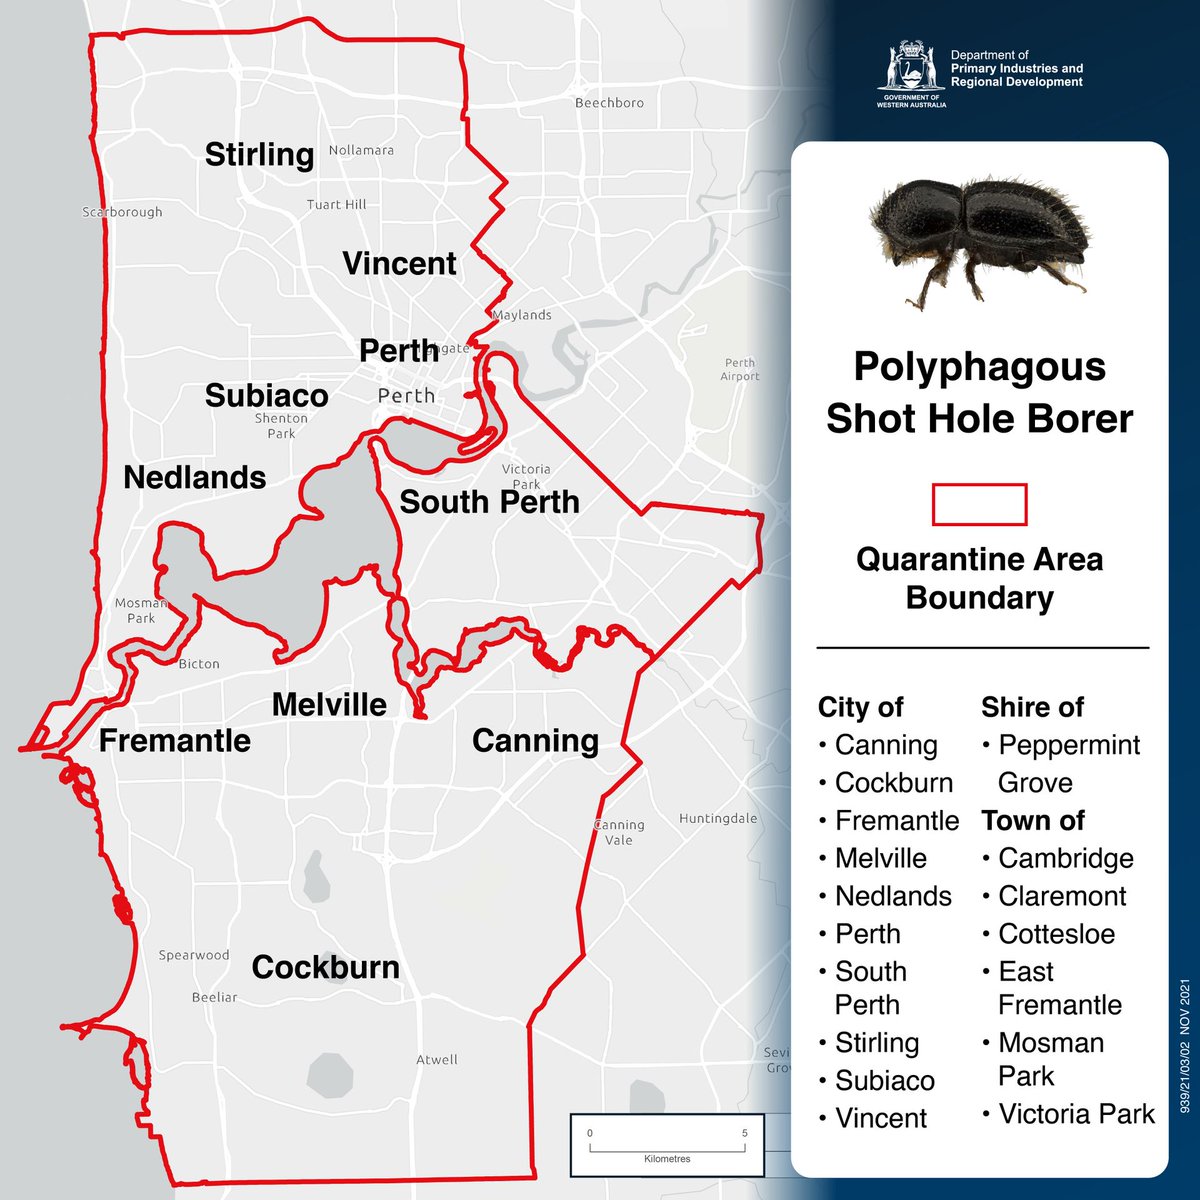 The City of South Perth is part of the quarantine area for an exotic pest called the Polyphagous shot-hole borer. People living & working in the quarantine area must not move any wood or plant material outside of the quarantine area. More info at bit.ly/3qkpA6N.